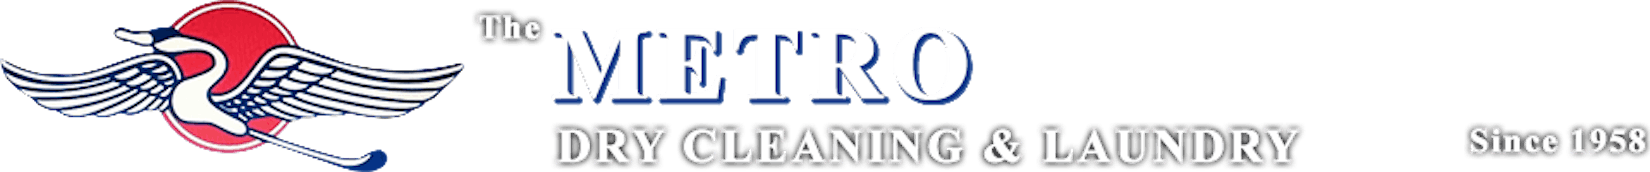 The Metro, Dry Cleaning & Laundry | Beauty